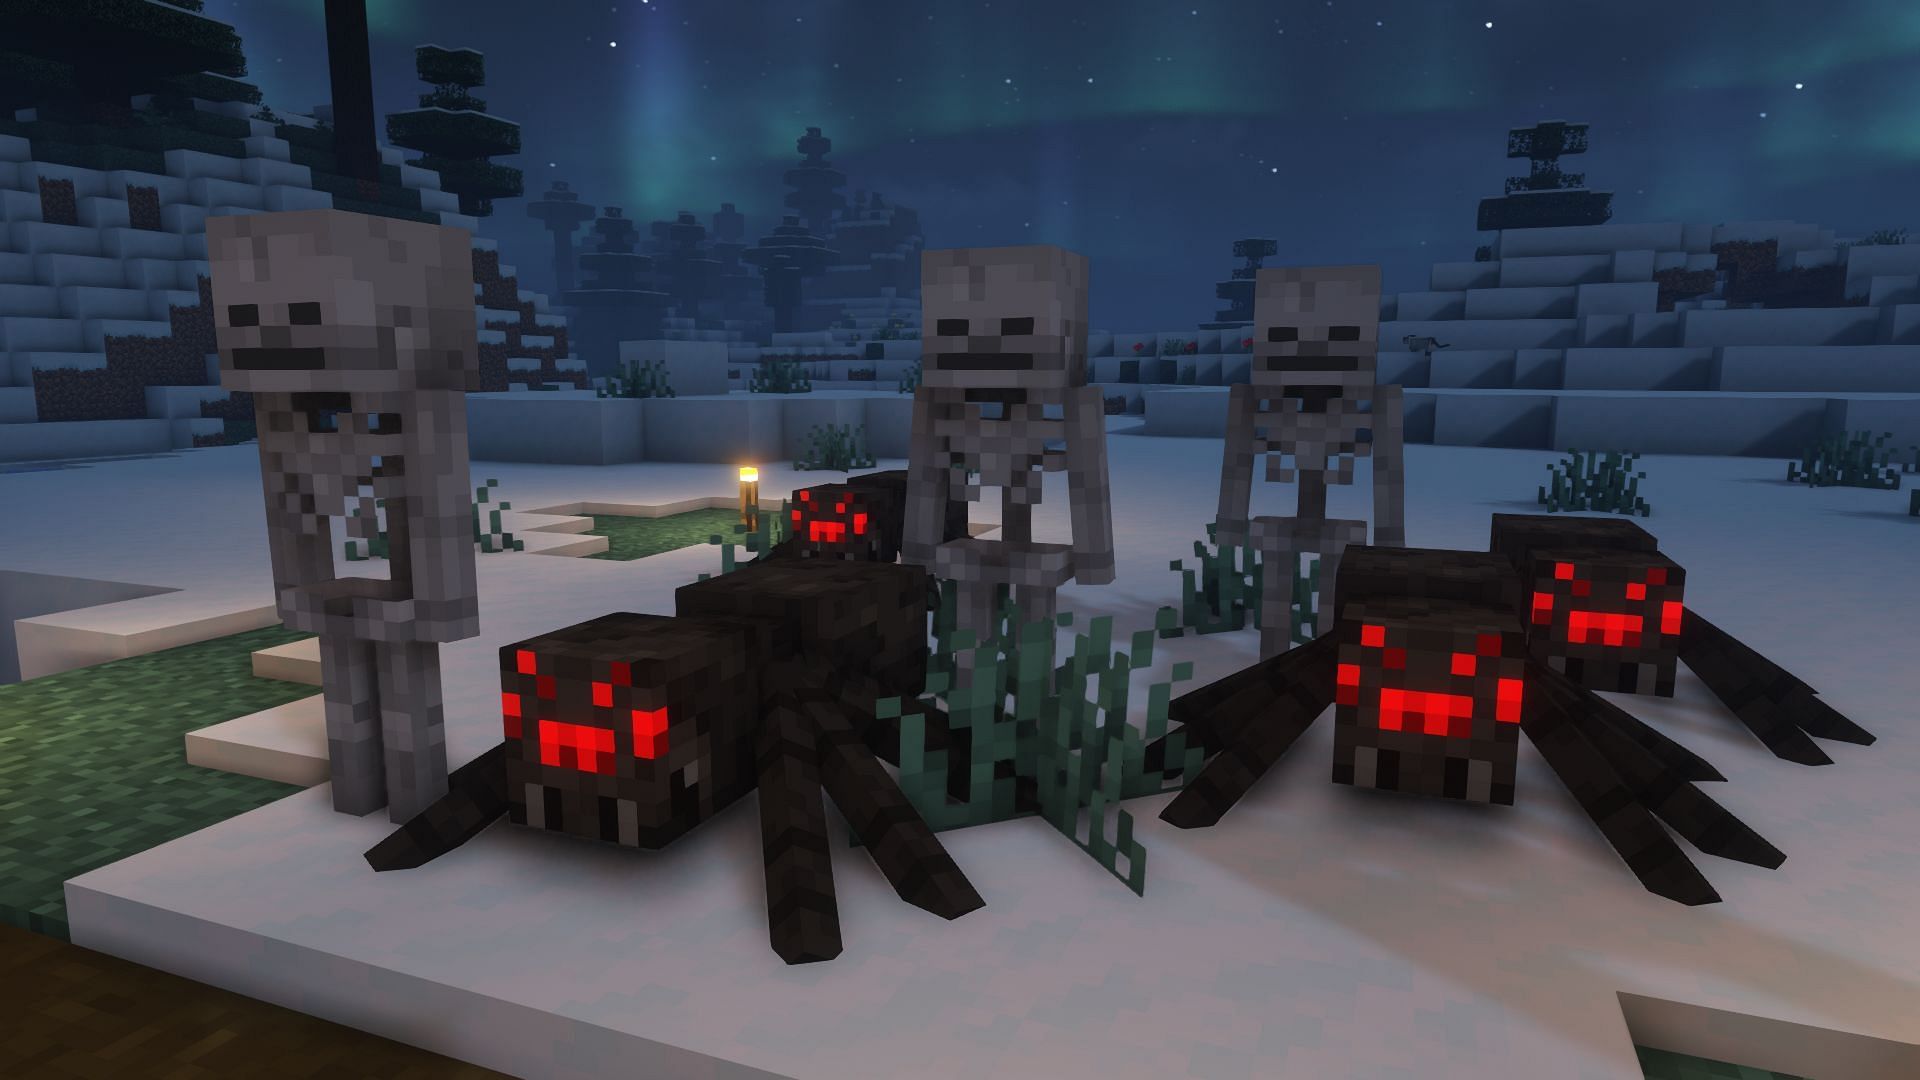 Many mobs at one place (Image via Minecraft)